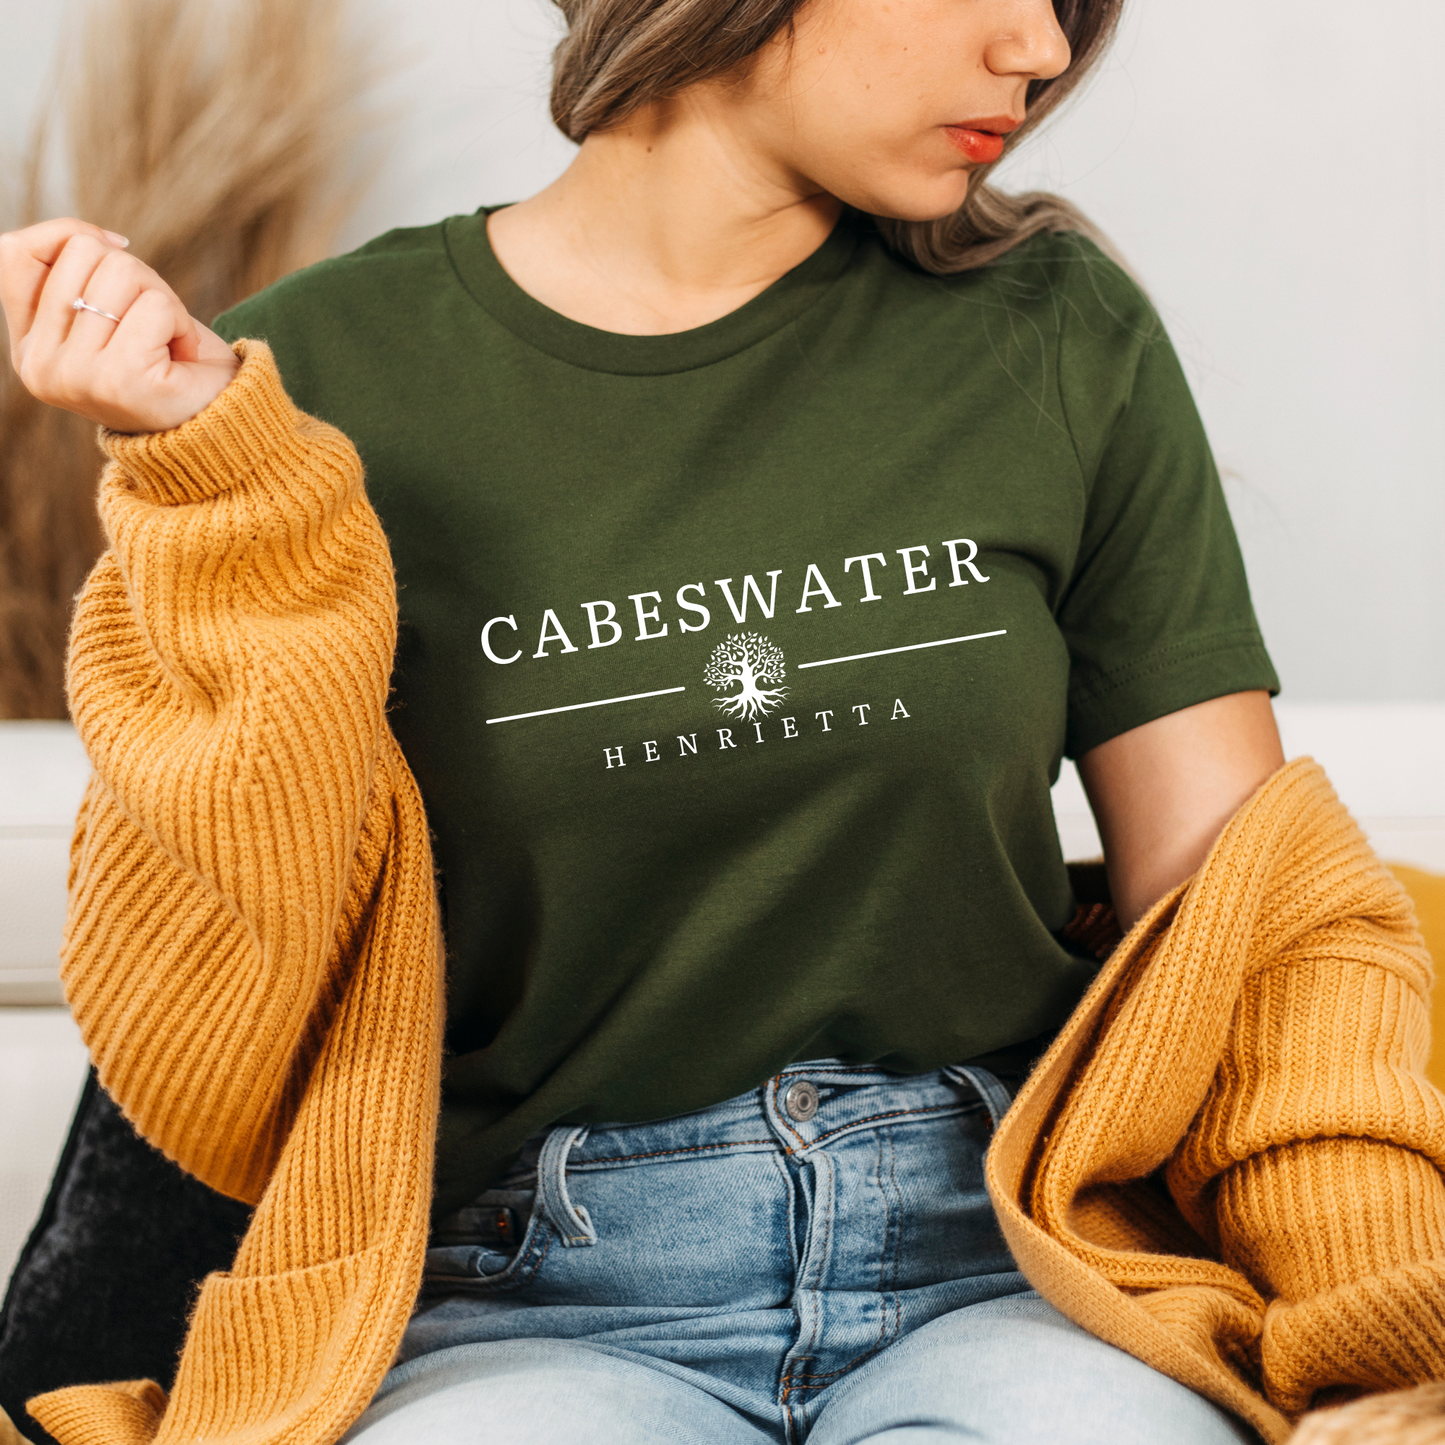 Cabeswater Shirt | The Raven Cycle Merch